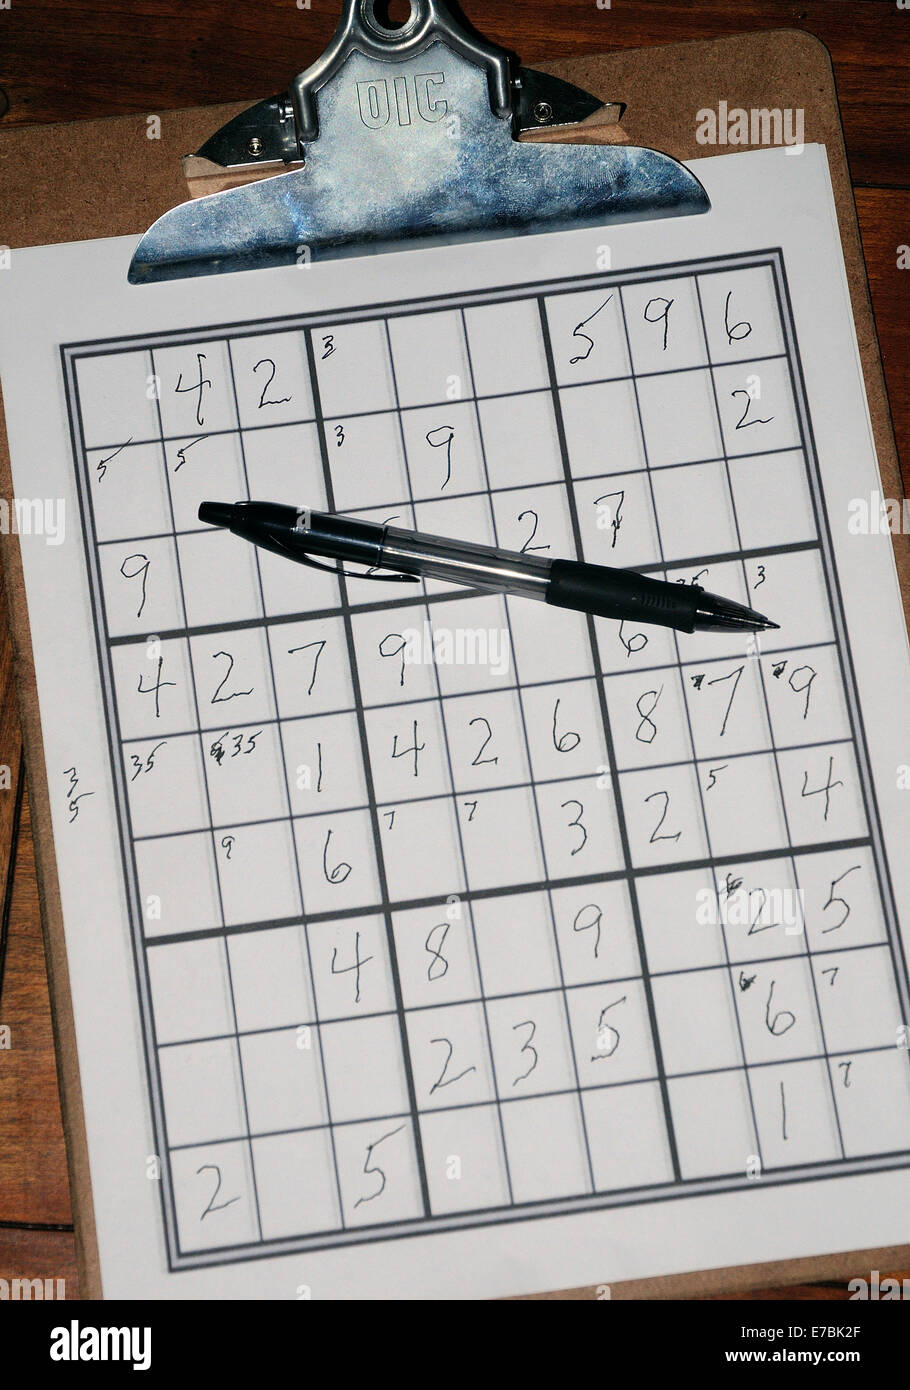 Clipboard with home-made Sudoku grid and game. Stock Photo